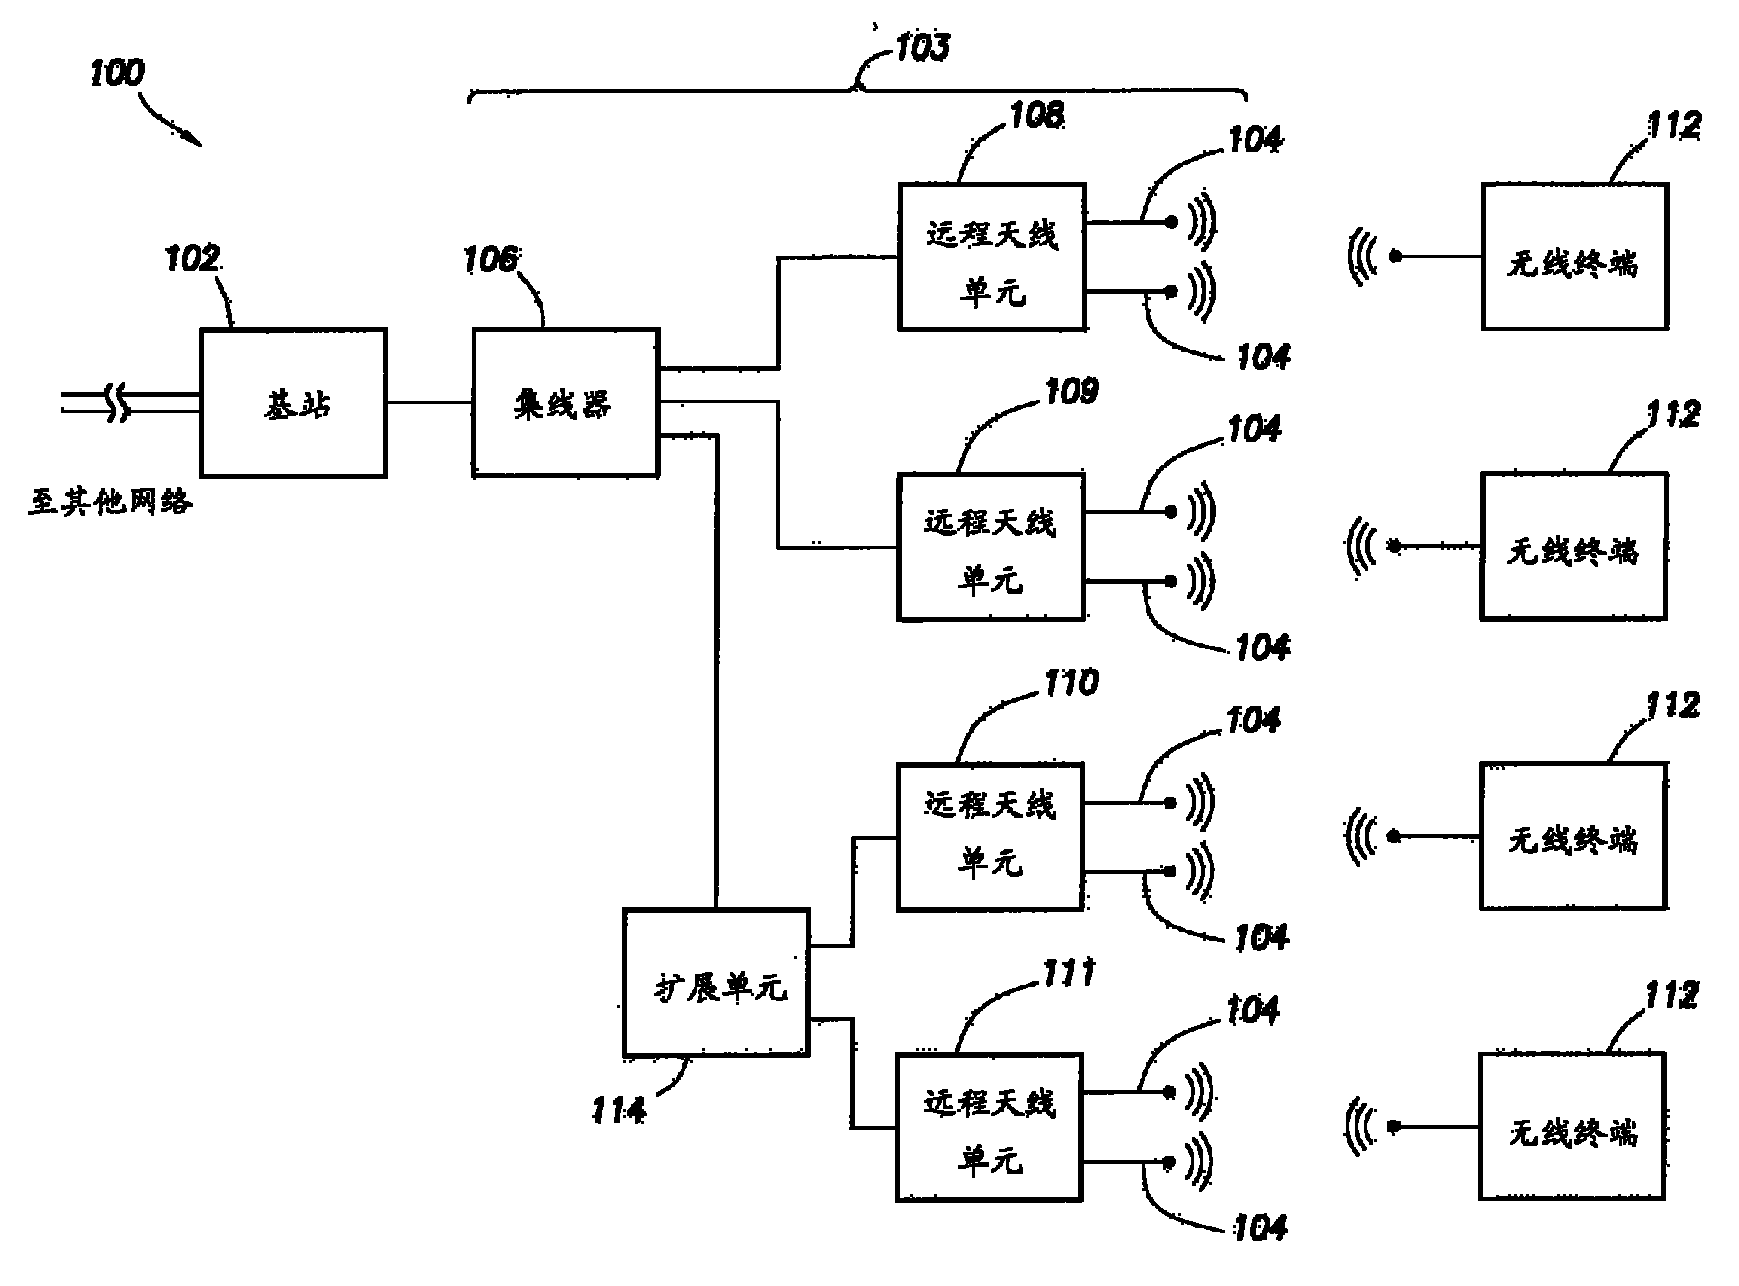 Method and apparatus for frame detection in a communications system